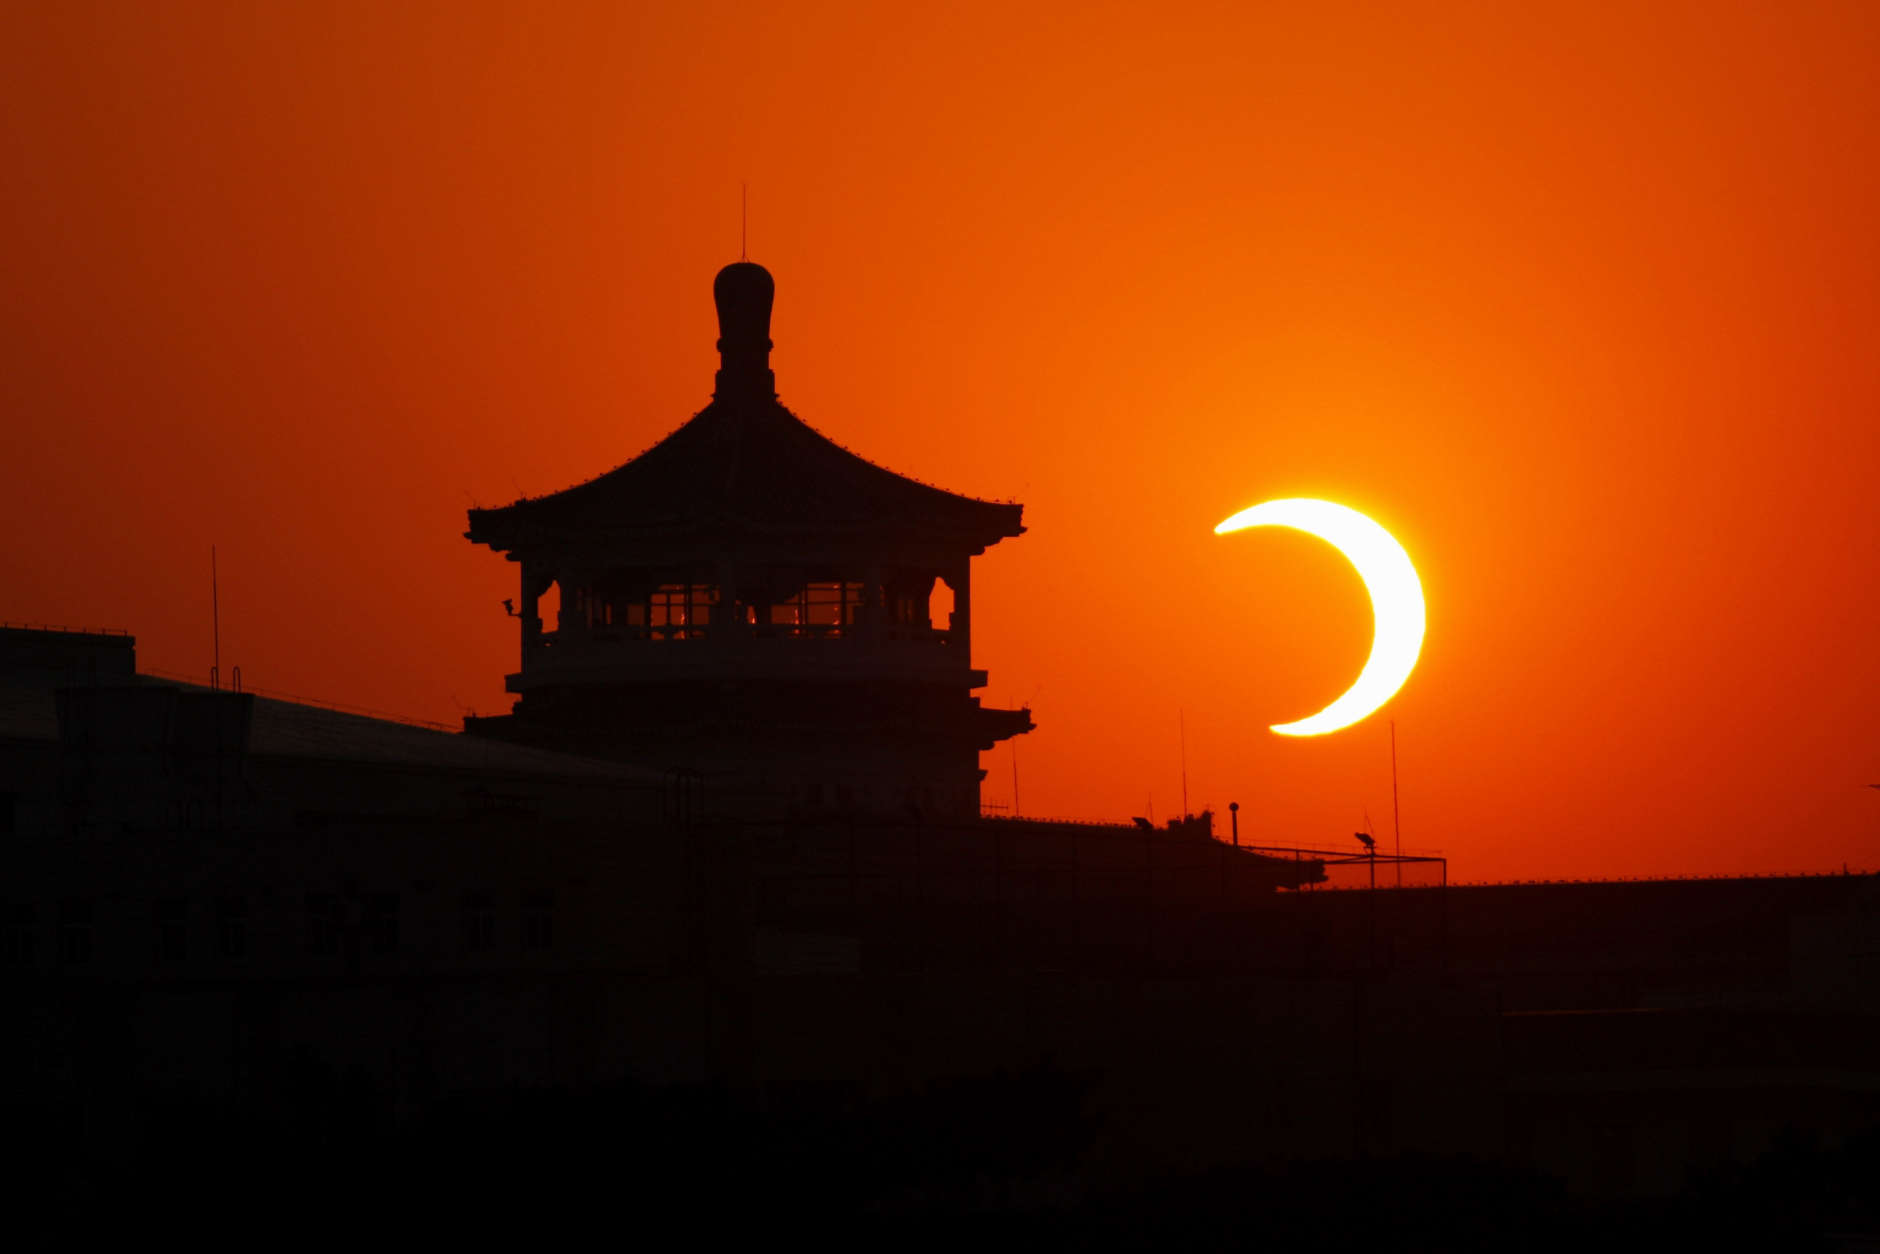 BEIJING - JANUARY 15:  The moon begins to obstruct the view of the sun from earth during a soloar eclipse at the Tian'anmen Square on January 15, 2010 in Shenyang, Liaoning Province of China. The eclipse, which first became visible in Tamil Nadu city of Kanyakumari, is predicted to be the longest of its kind for the next 1000 years.  (Photo by Feng Li/Getty Images)